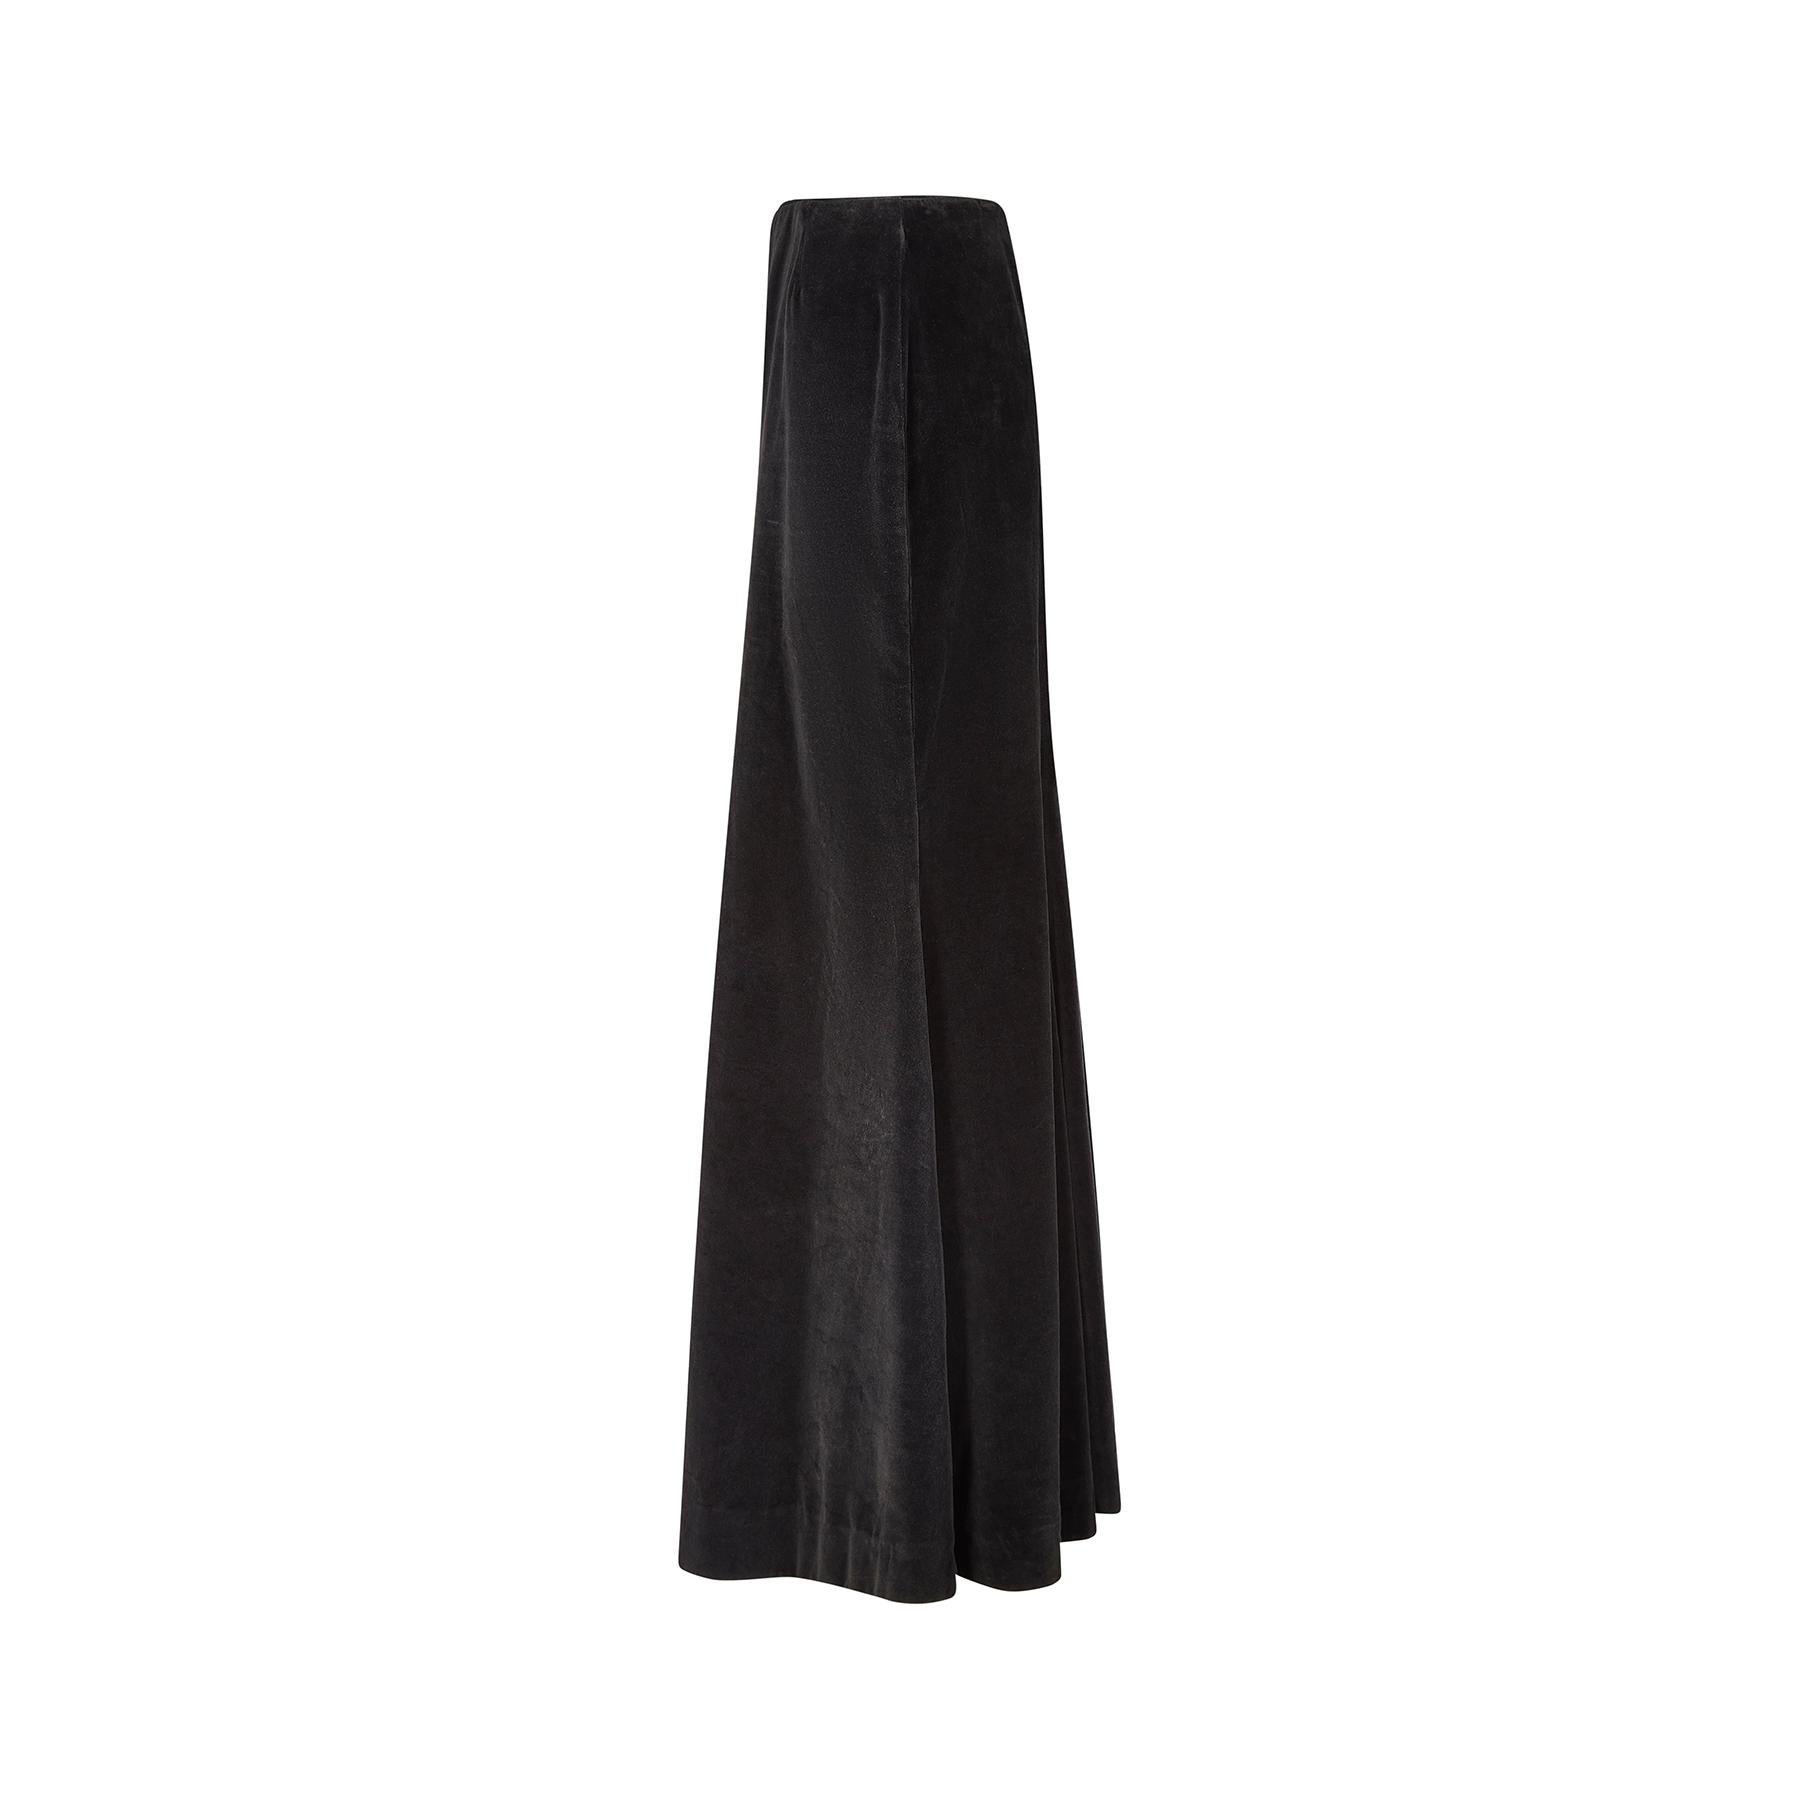 This 1970s maxi skirt is by renowned boutique owner and knitwear designer Diana Leslie who owned Animal Rainbow boutique in London and Countdown in Greenwich Village, New York, during the 1960s through to the early 1980s.  Bette Midler was one of